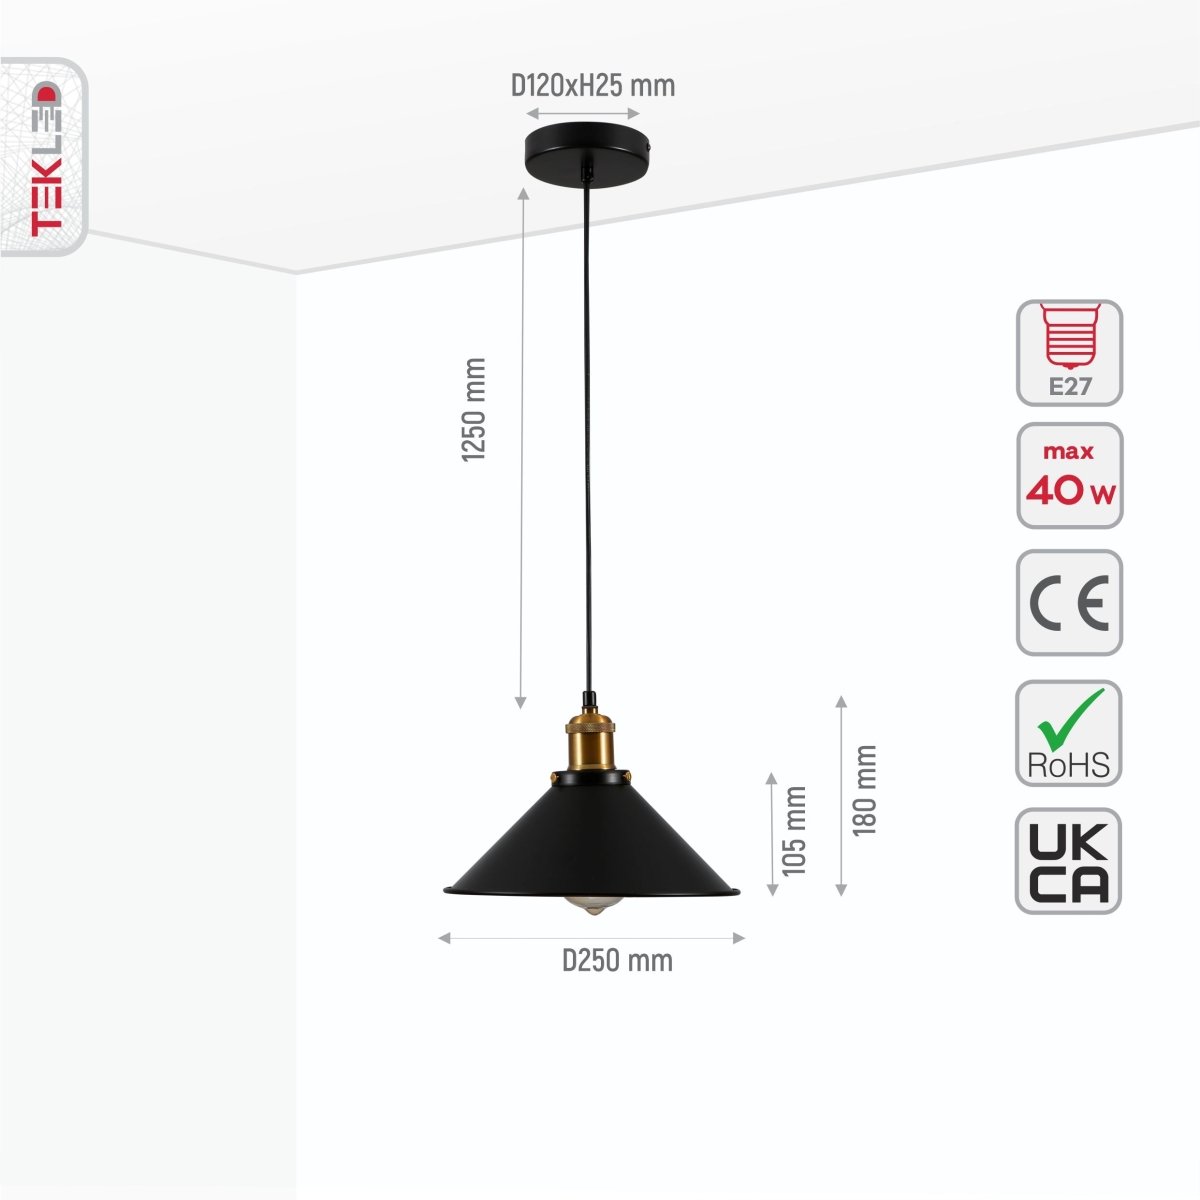 Size and specs of Black Metal Medium Funnel Metal Ceiling Pendant Light with E27 Fitting | TEKLED 150-18360